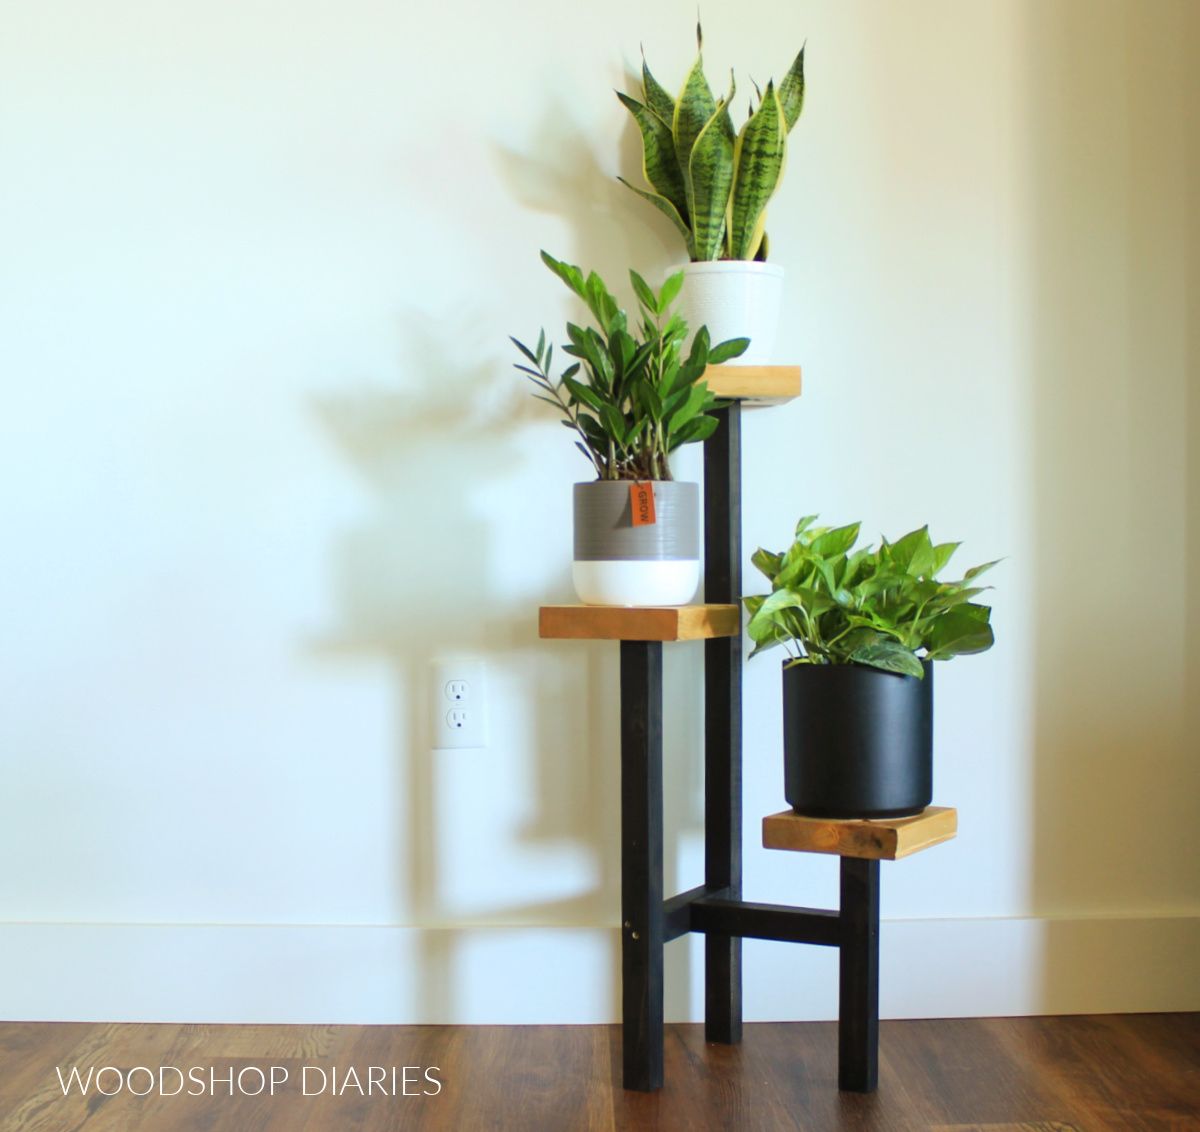 Diy Tiered Plant Stand | From Scrap Wood! Throughout Three Tiered Plant Stands (View 8 of 15)